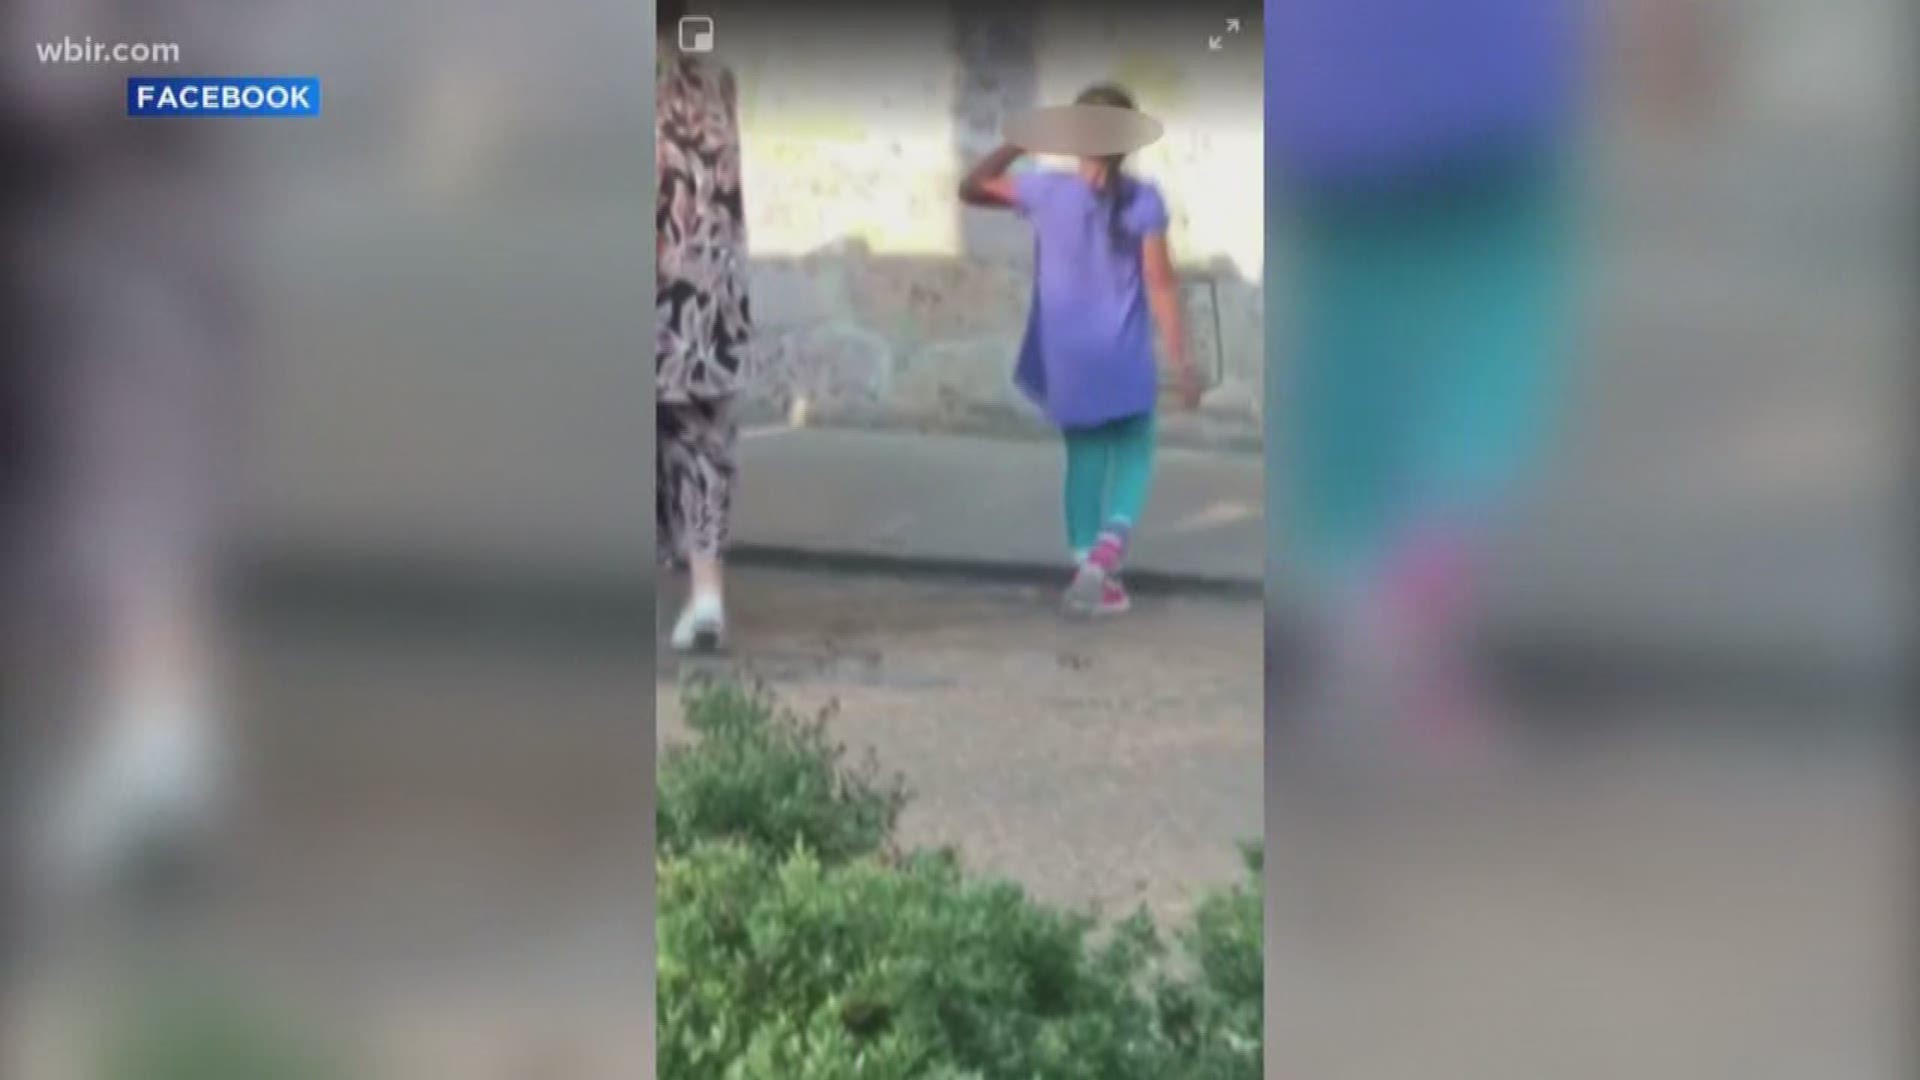 A Memphis woman was caught on camera as she appeared to let a child out of a pet kennel.